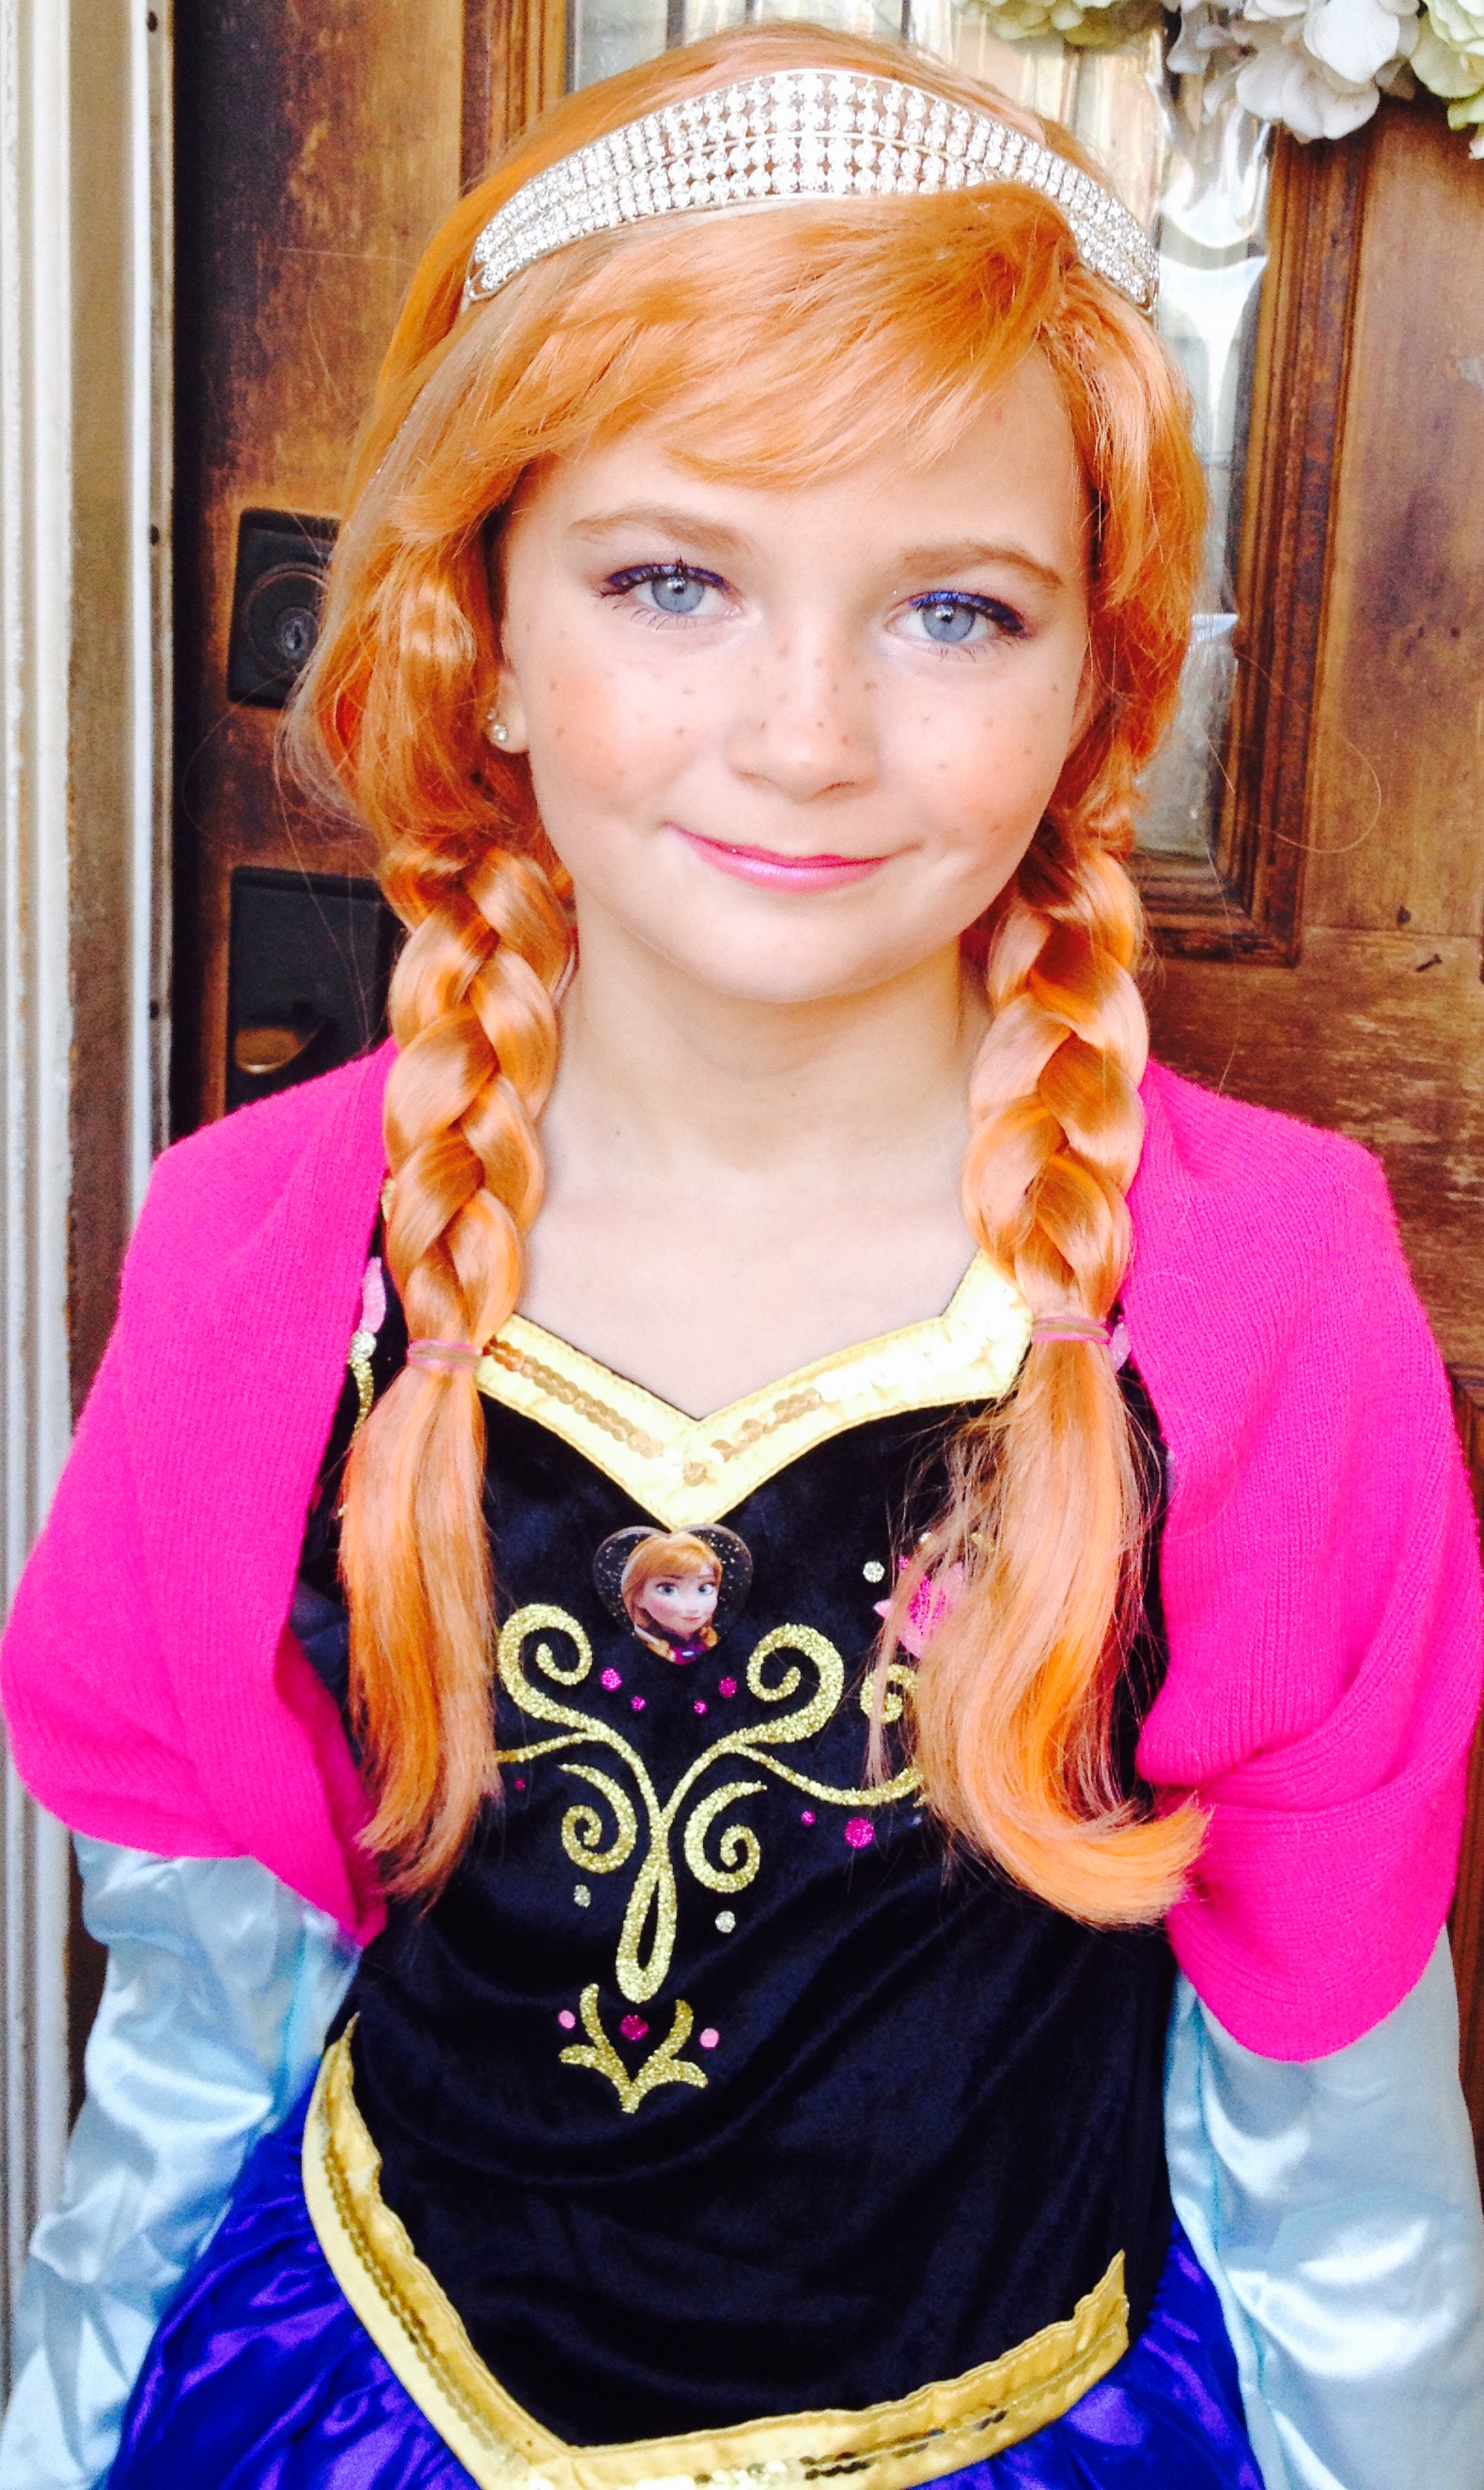 Lainee as Princess Anna from 